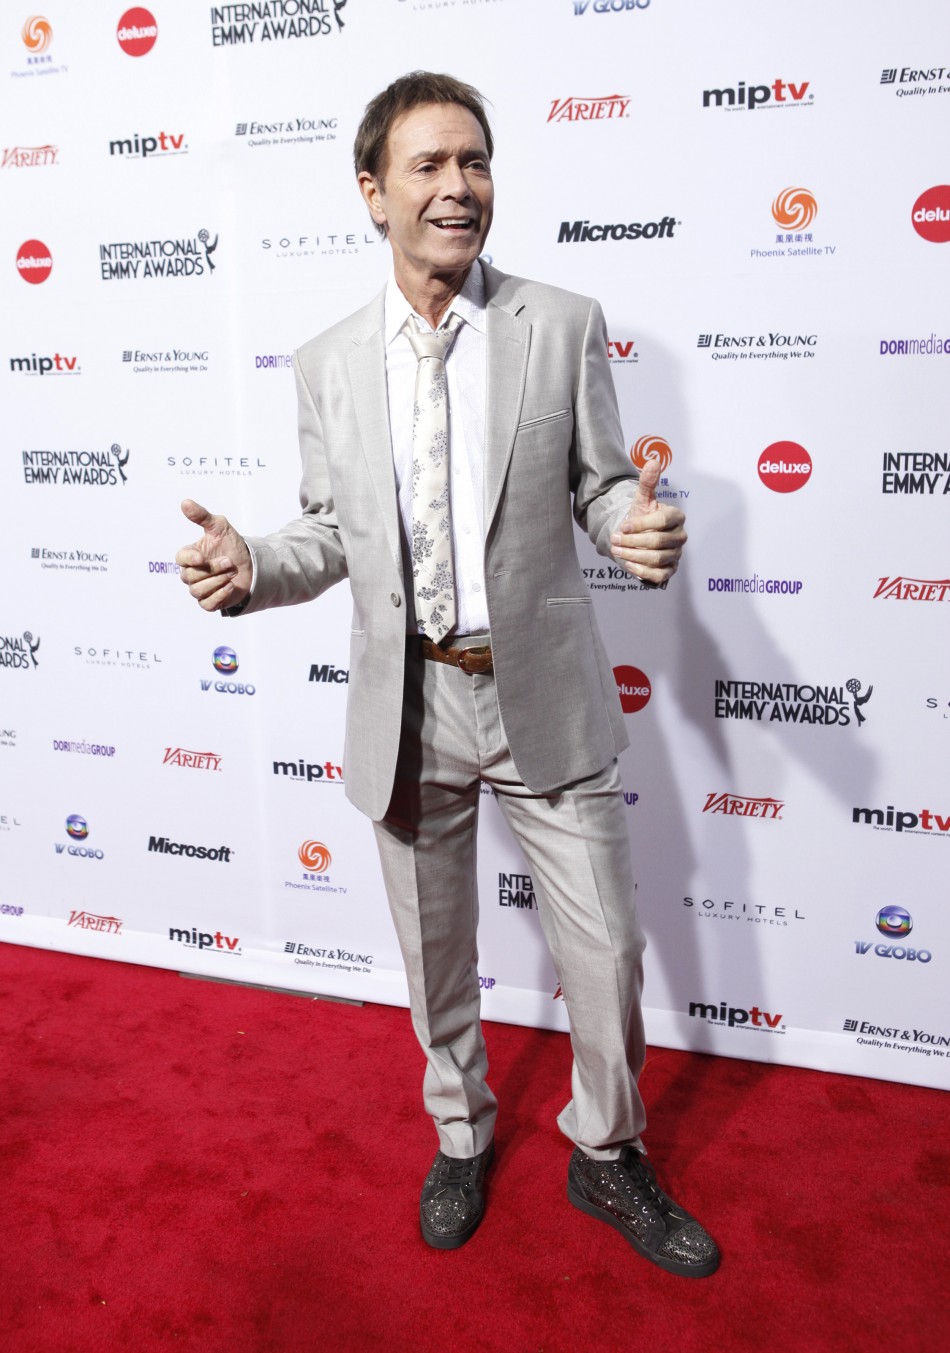 British musician Cliff Richards arrives at the International Emmy Awards in New York